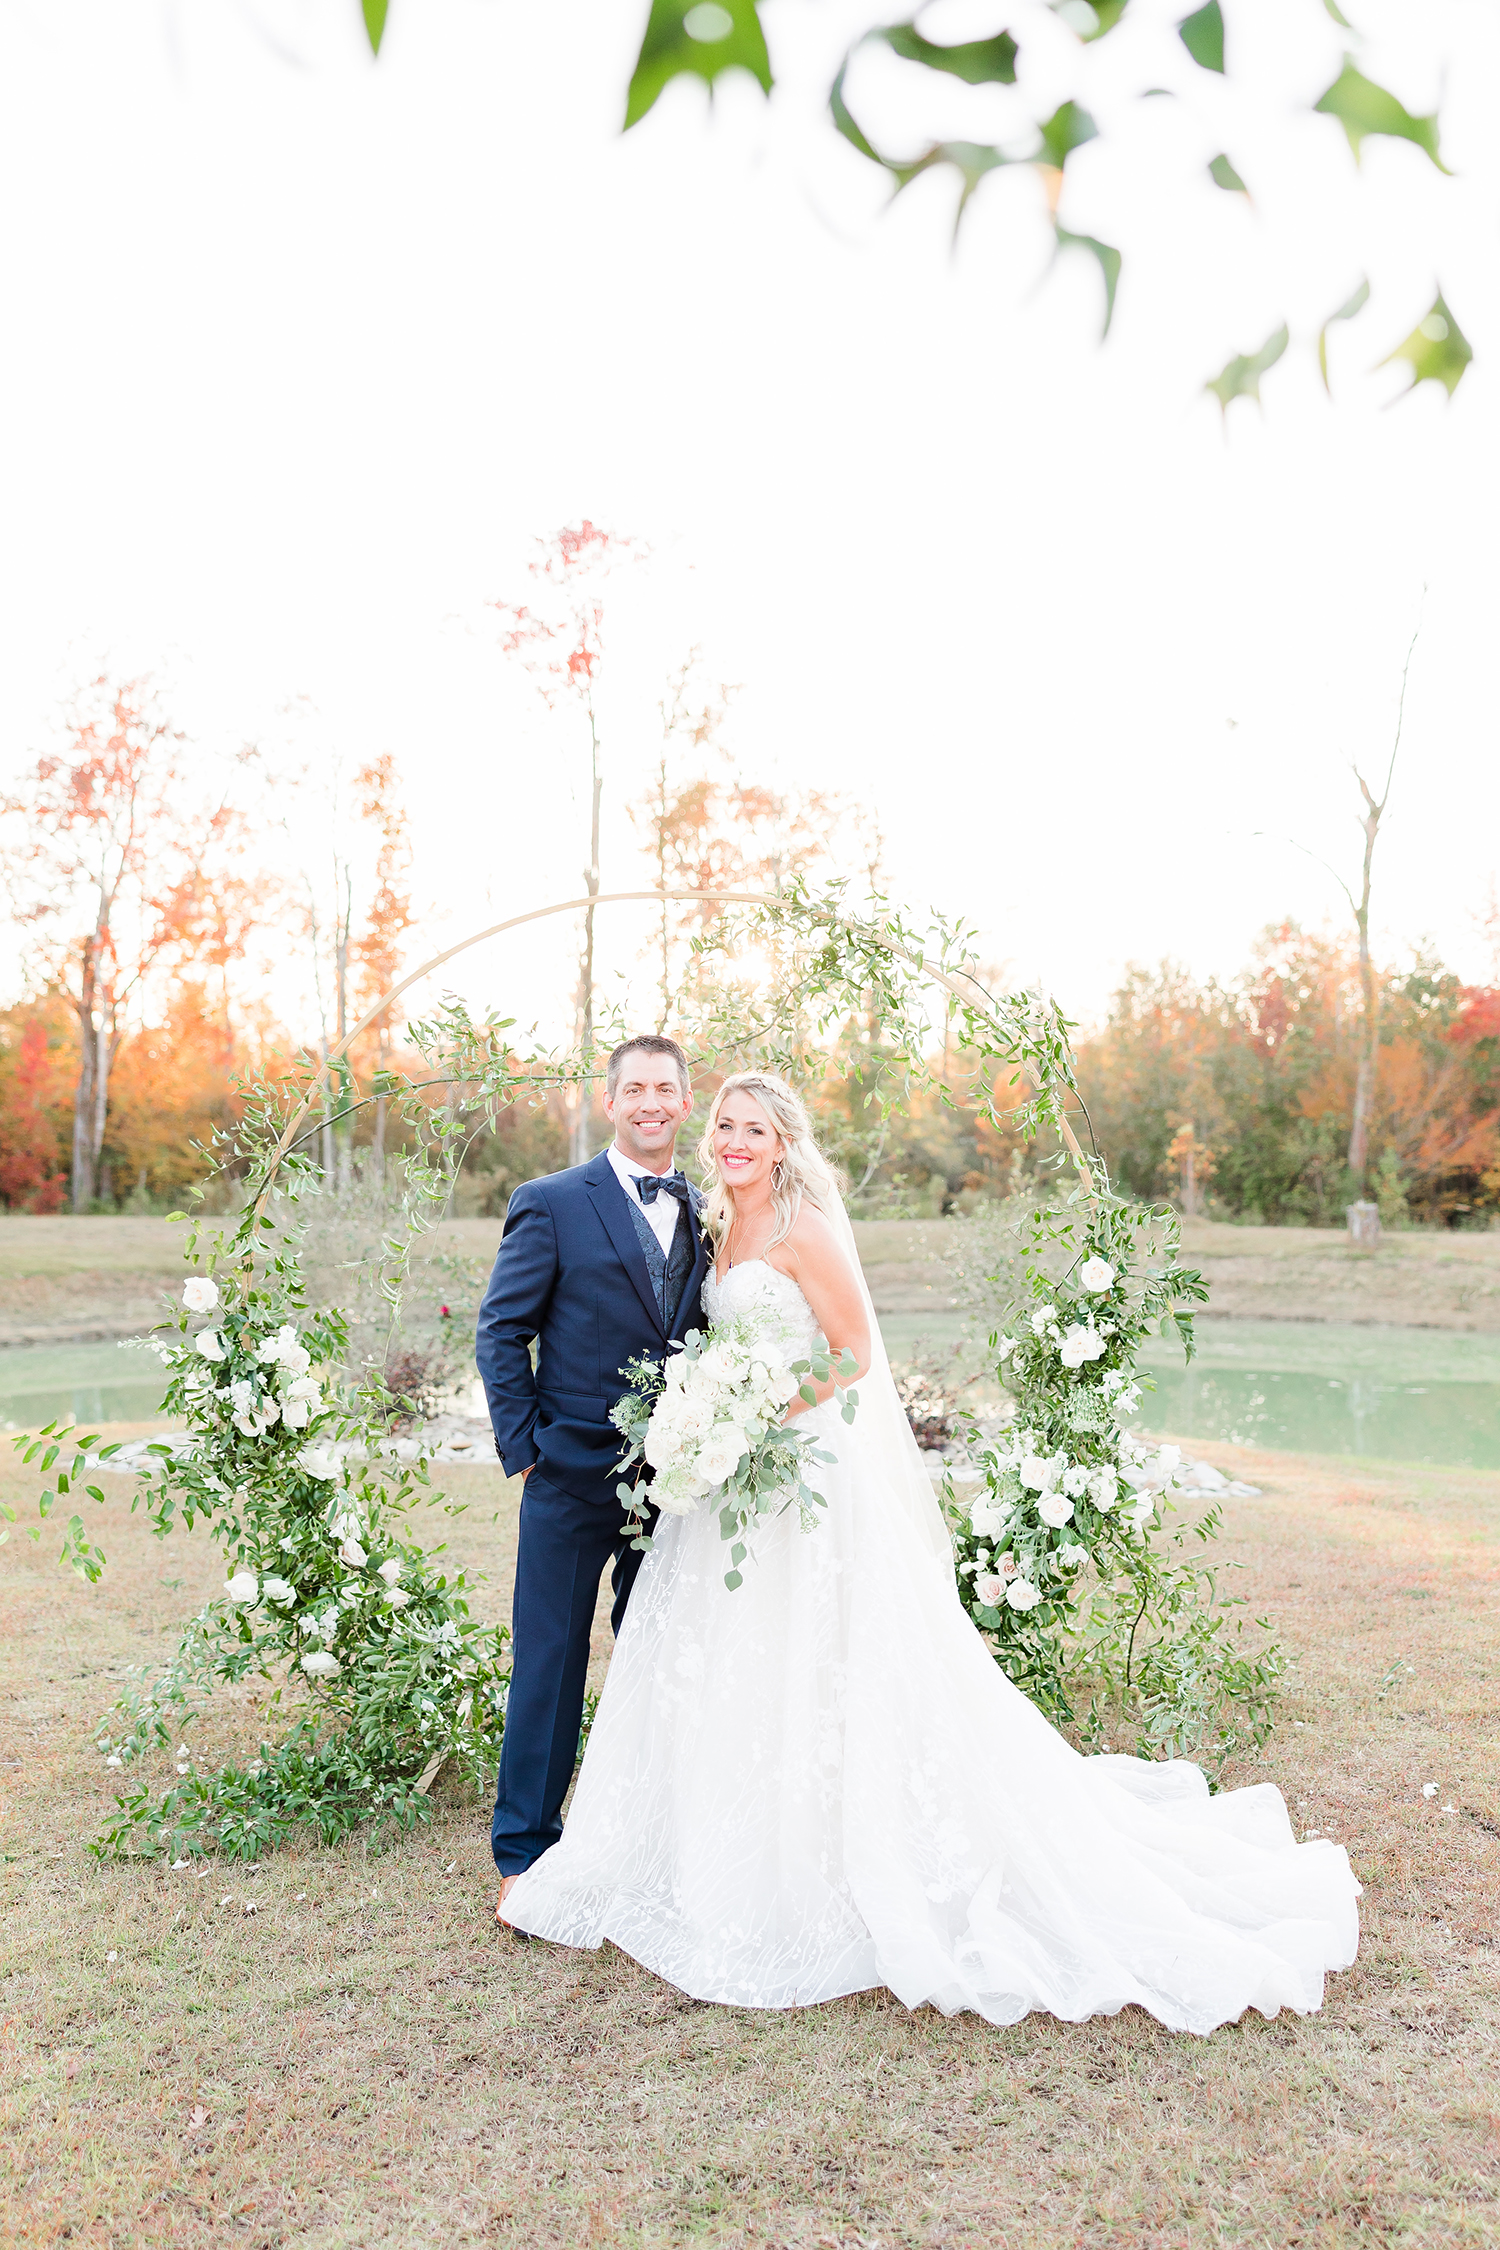 Greenery surrounded bride and groom portraits